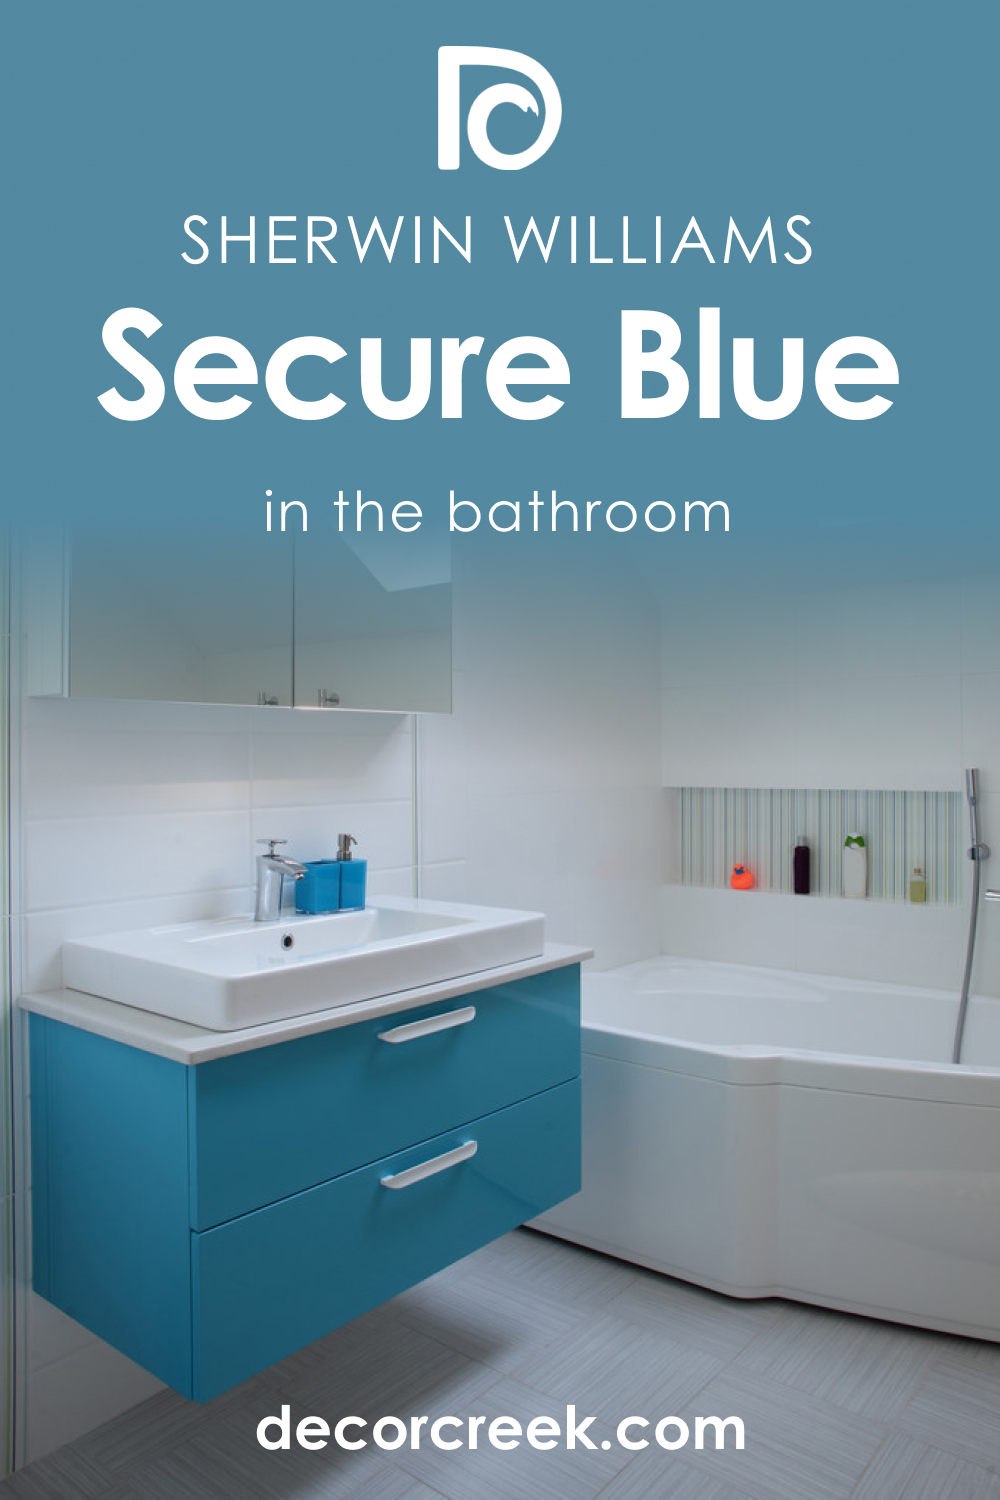 How to Use Secure Blue SW 6508 in the Bathroom?